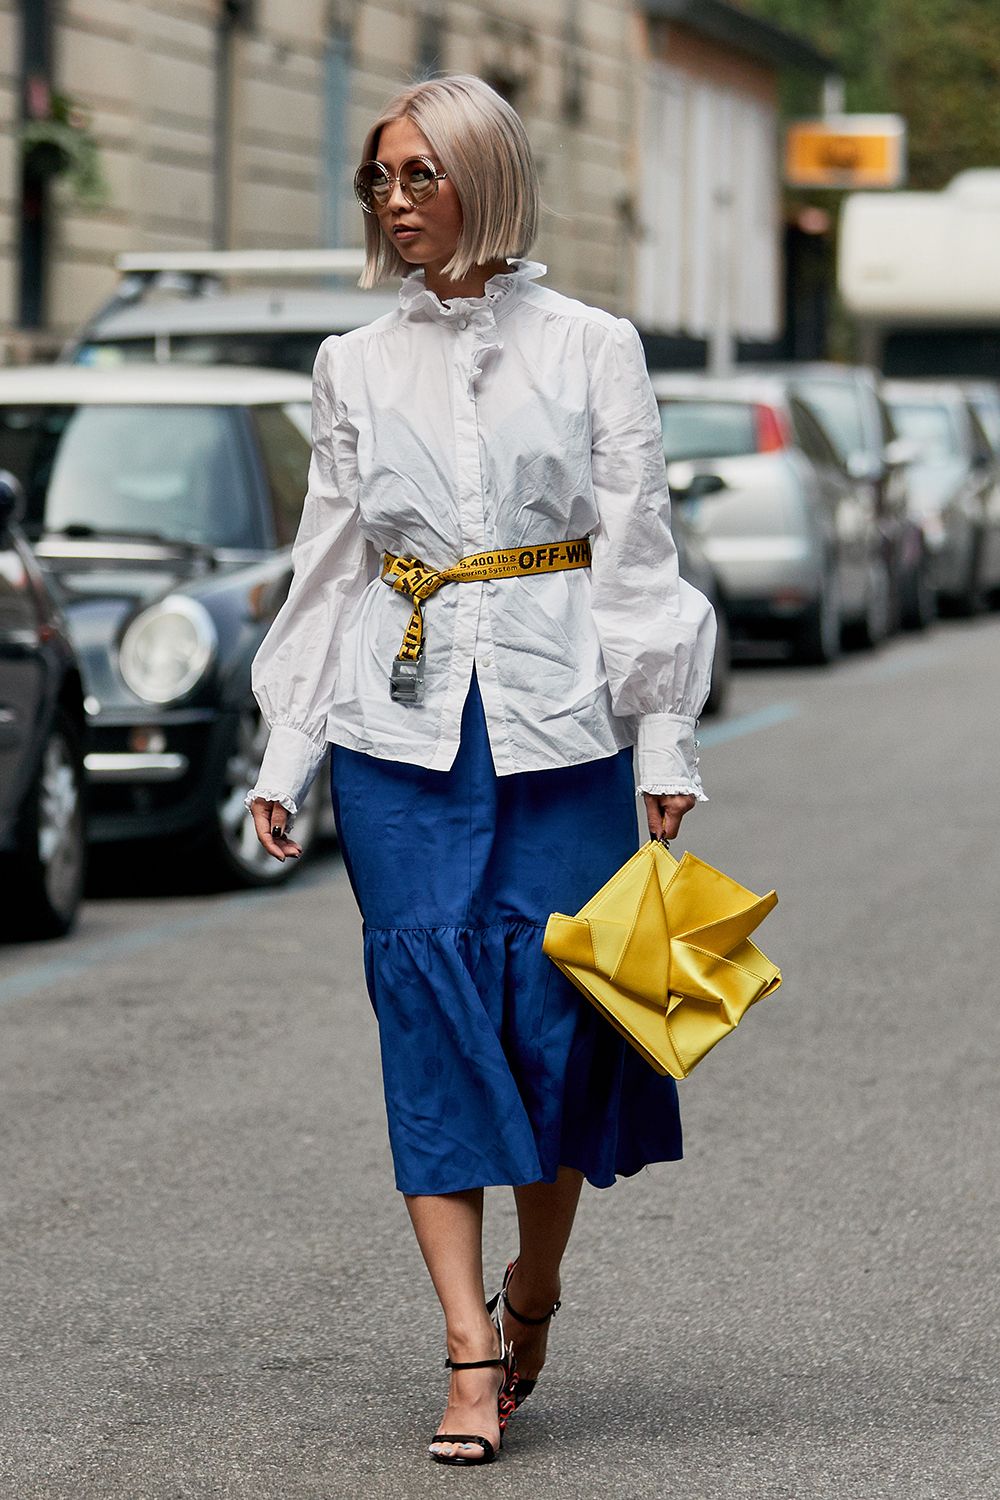 The Latest Street Style From Milan Fashion Week | Who What Wear